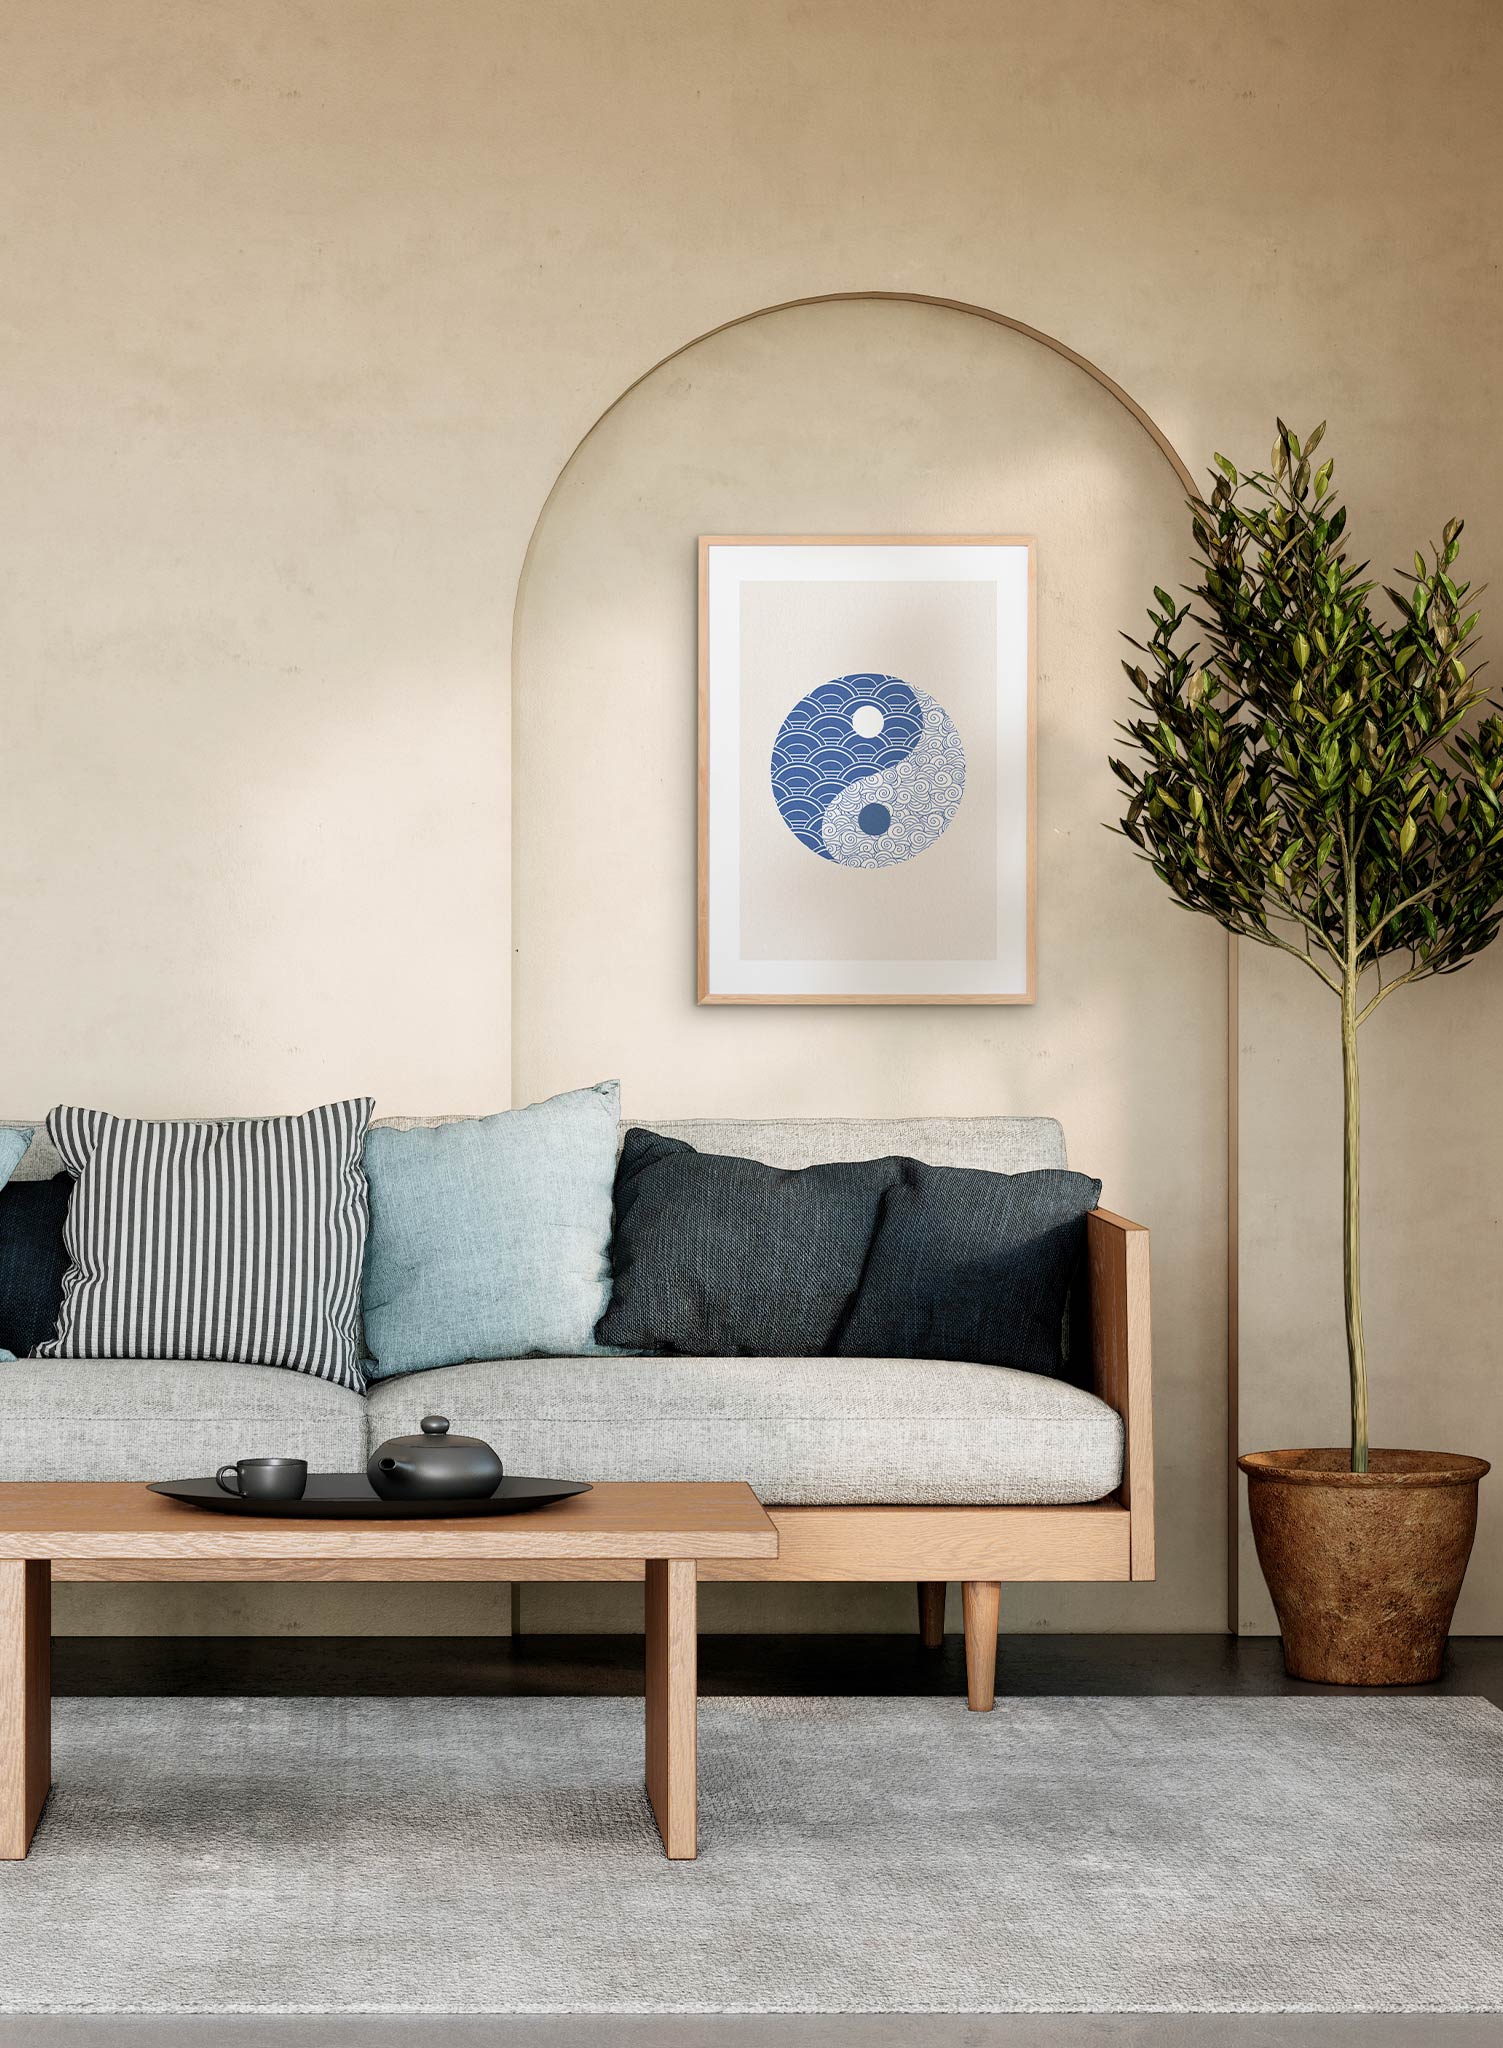 Yin-Yang is a minimalist illustration by Opposite Wall of the Yin-Yang sign filled with oriental patterns instead.